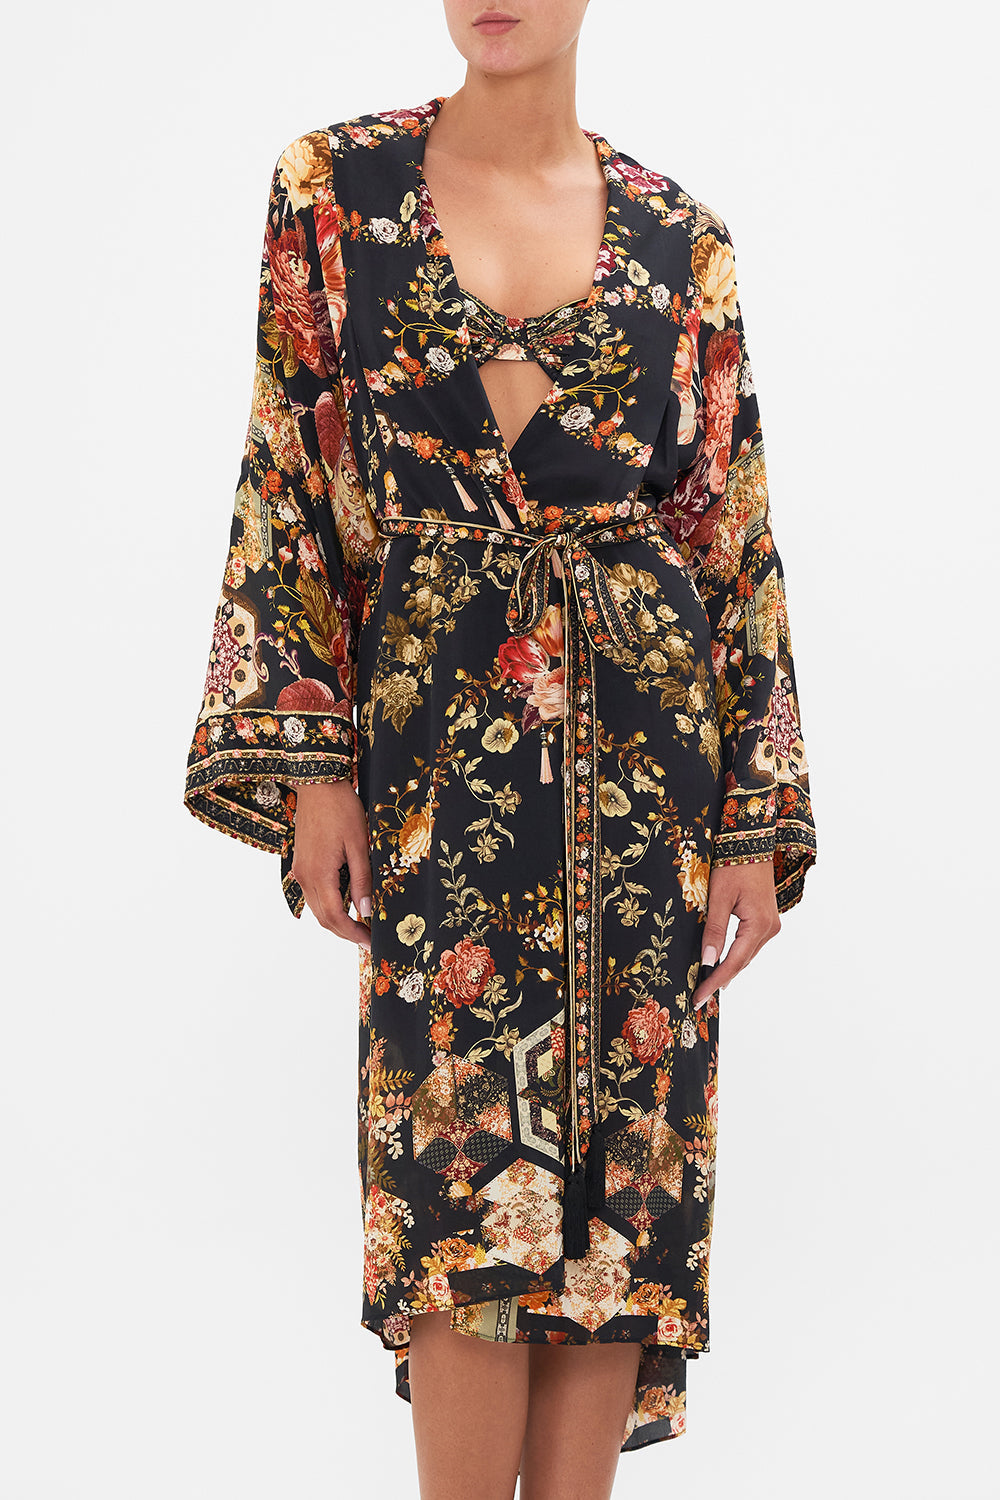 CAMILLA Floral Oversized Layer with Tie Sleeve in Stitched in Time